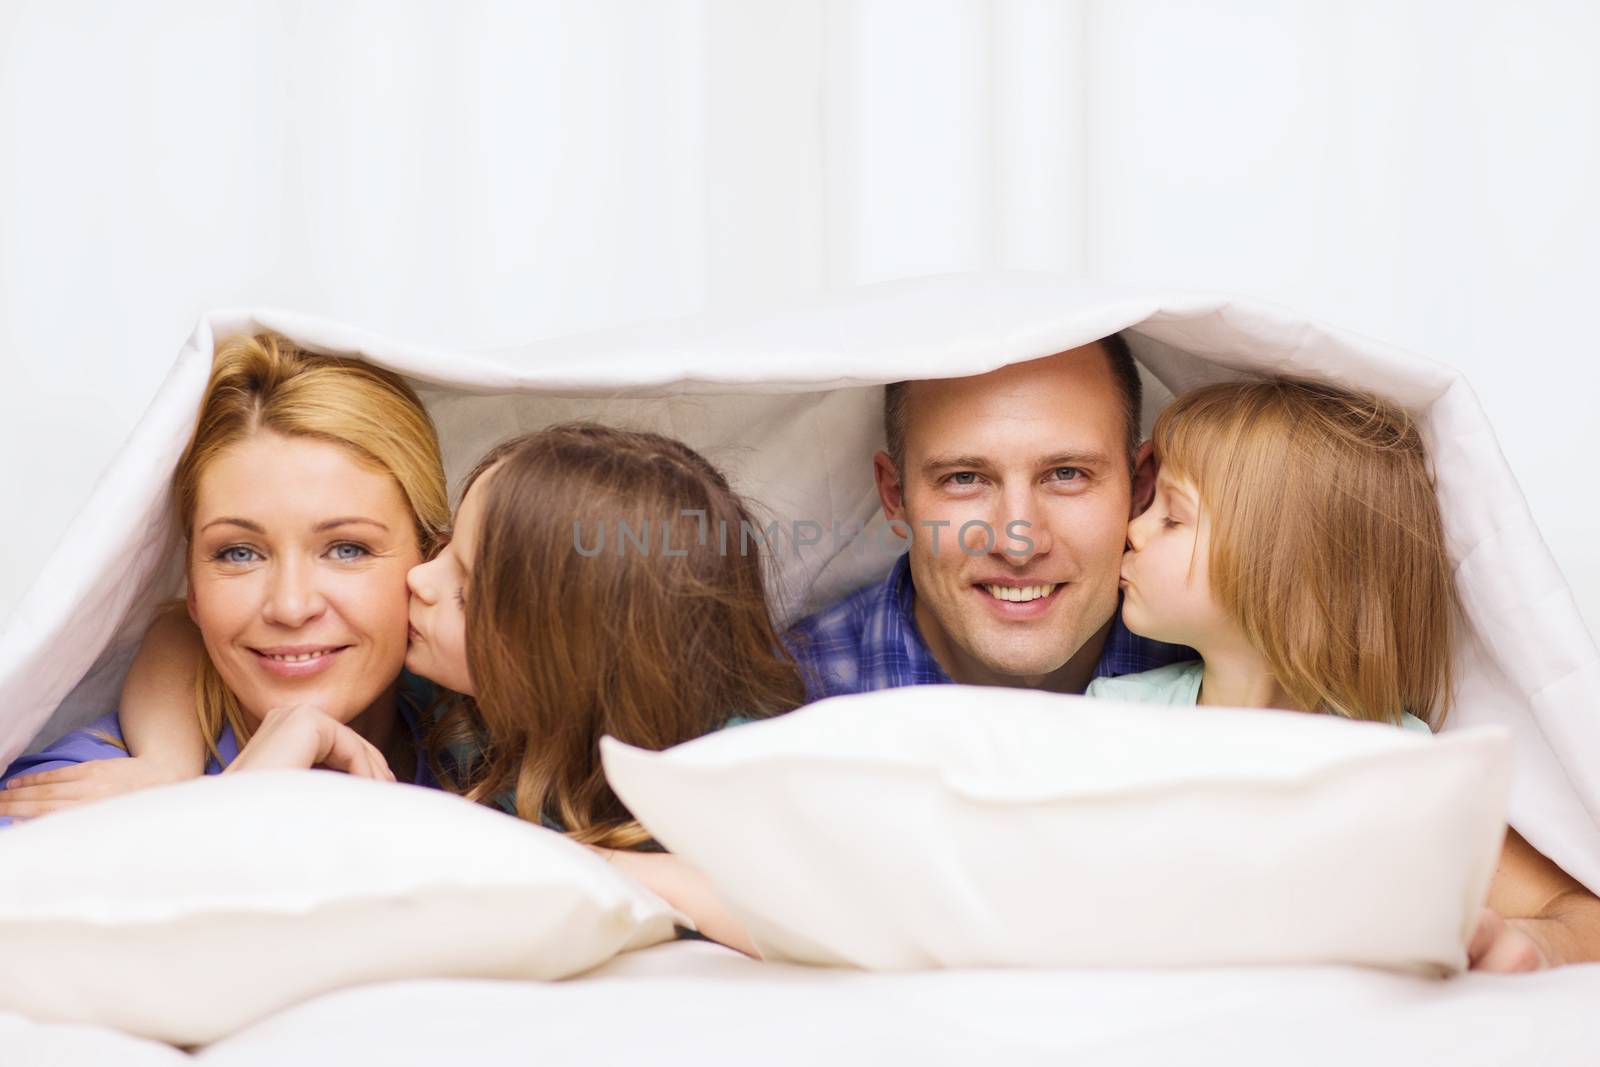 family, children and home concept - two little girls kissing their parents on cheek under blanket at home